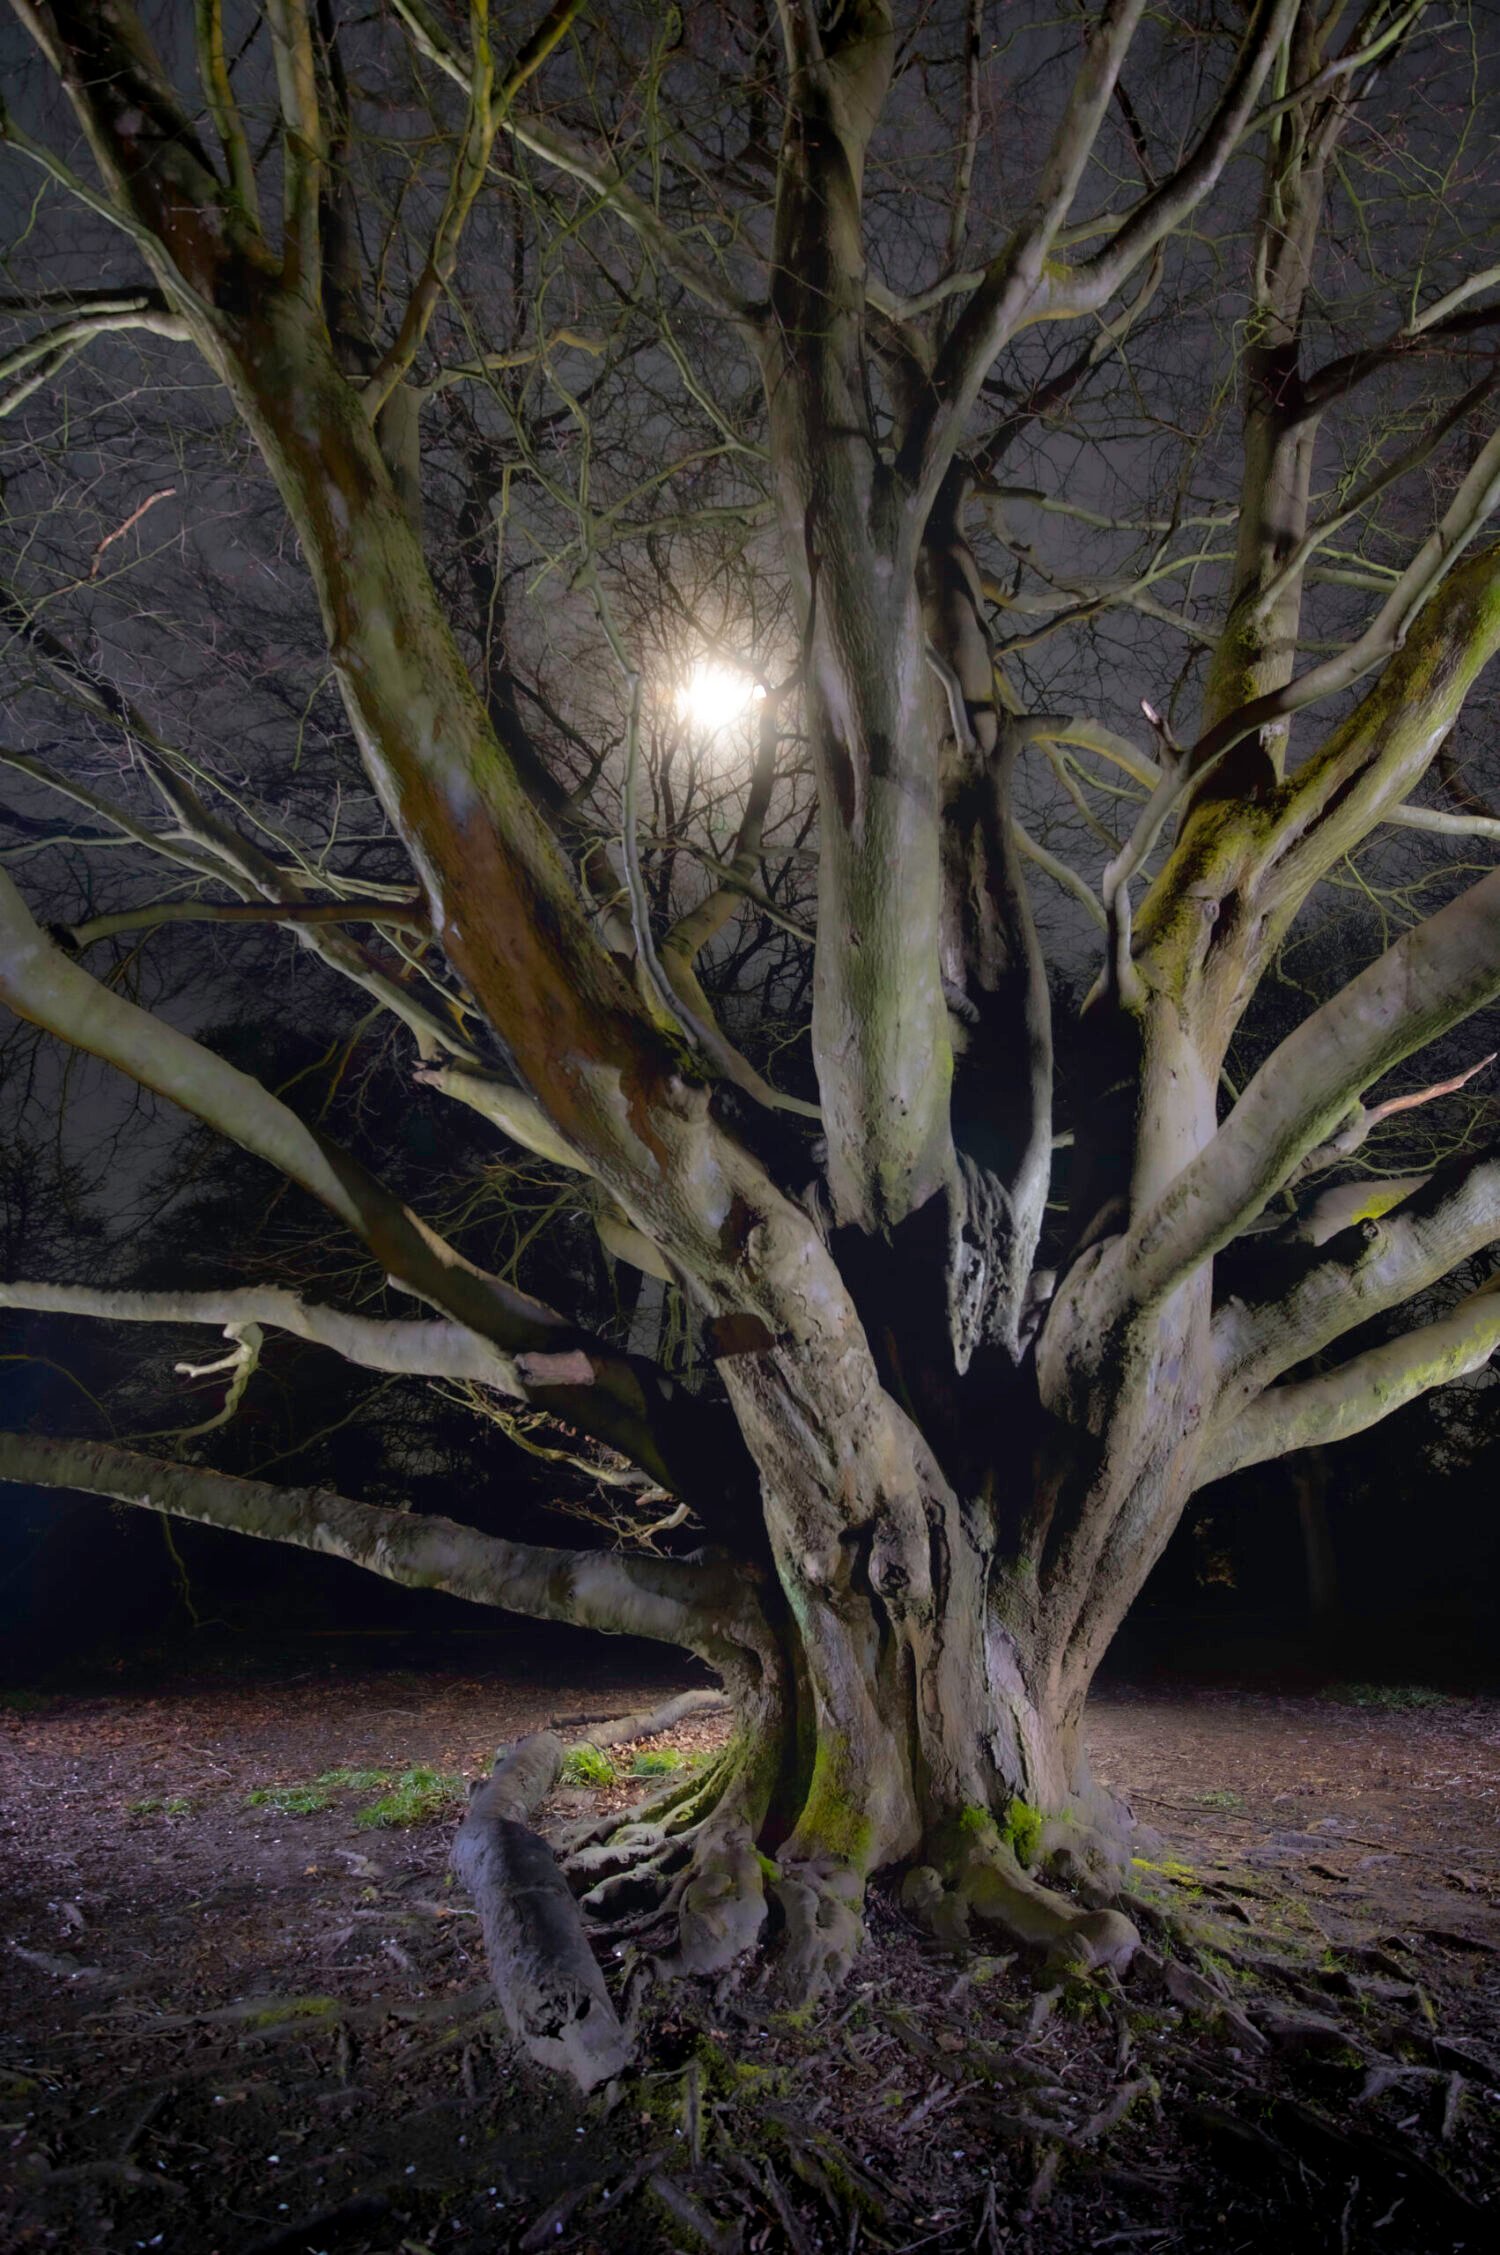 A haunting tree illuminated from below against a night sky with a full moon peering through the branches.